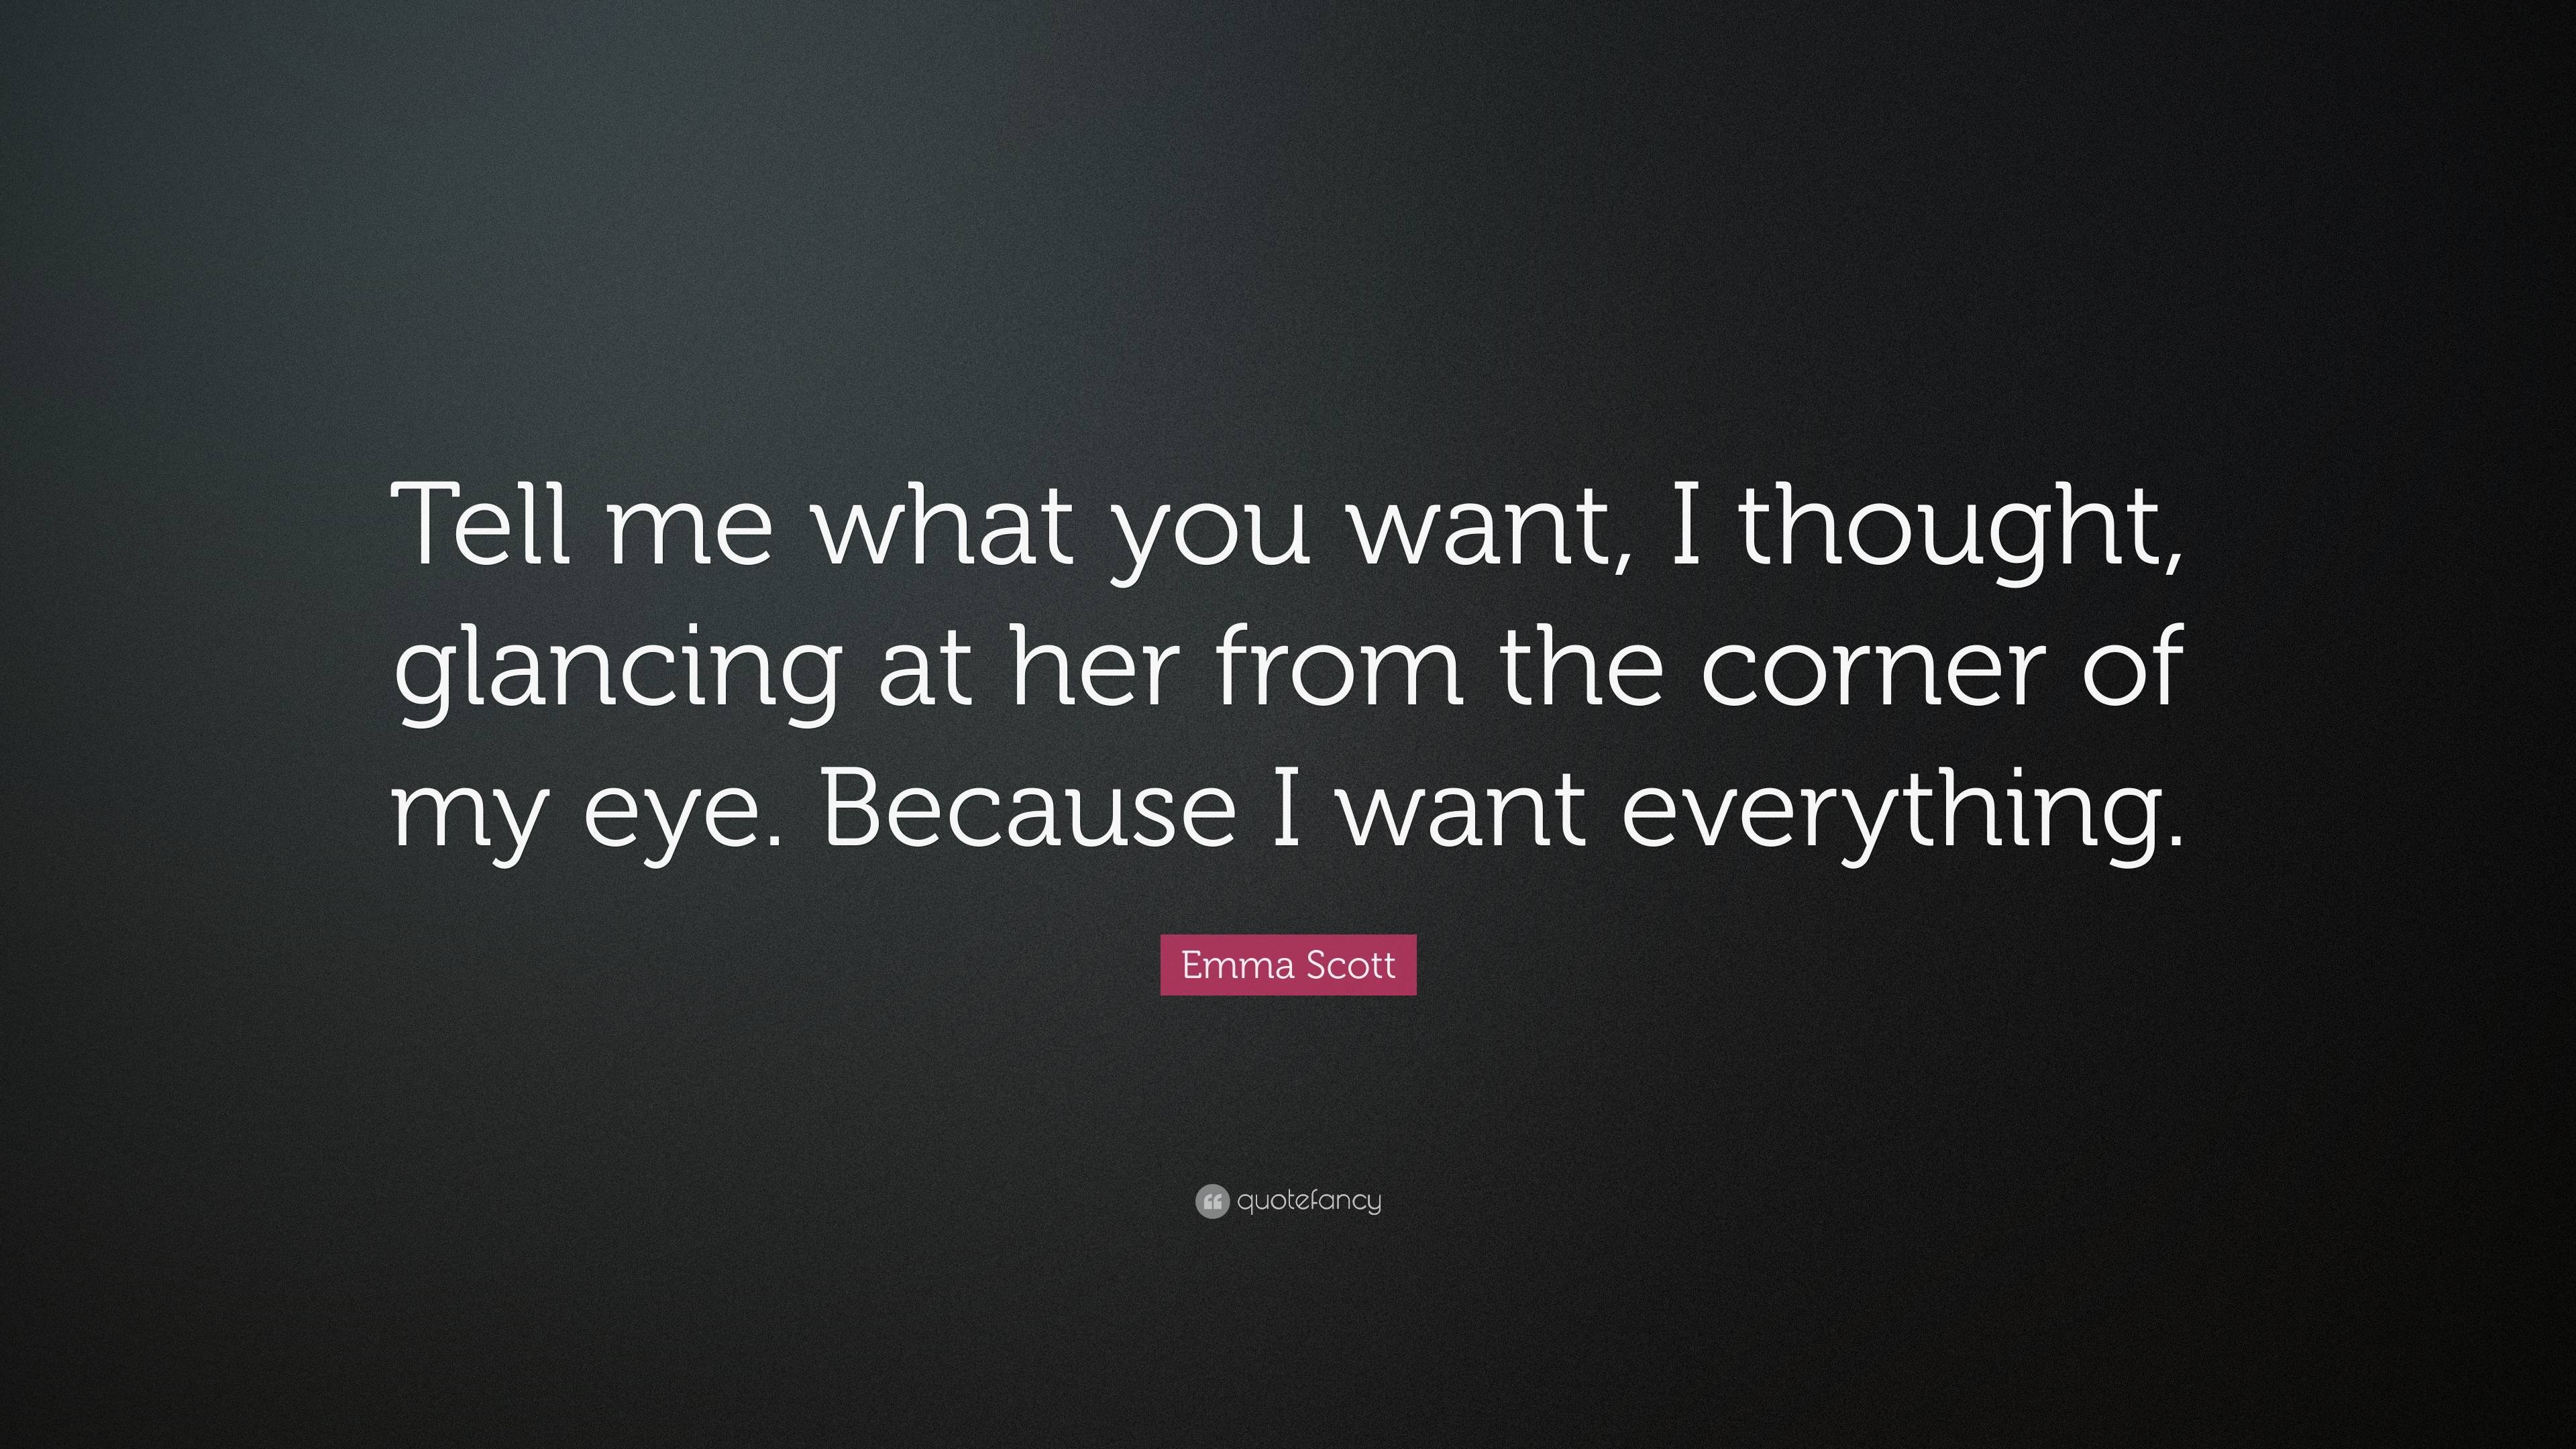 Emma Scott Quote: “Tell me what you want, I thought, glancing at her ...